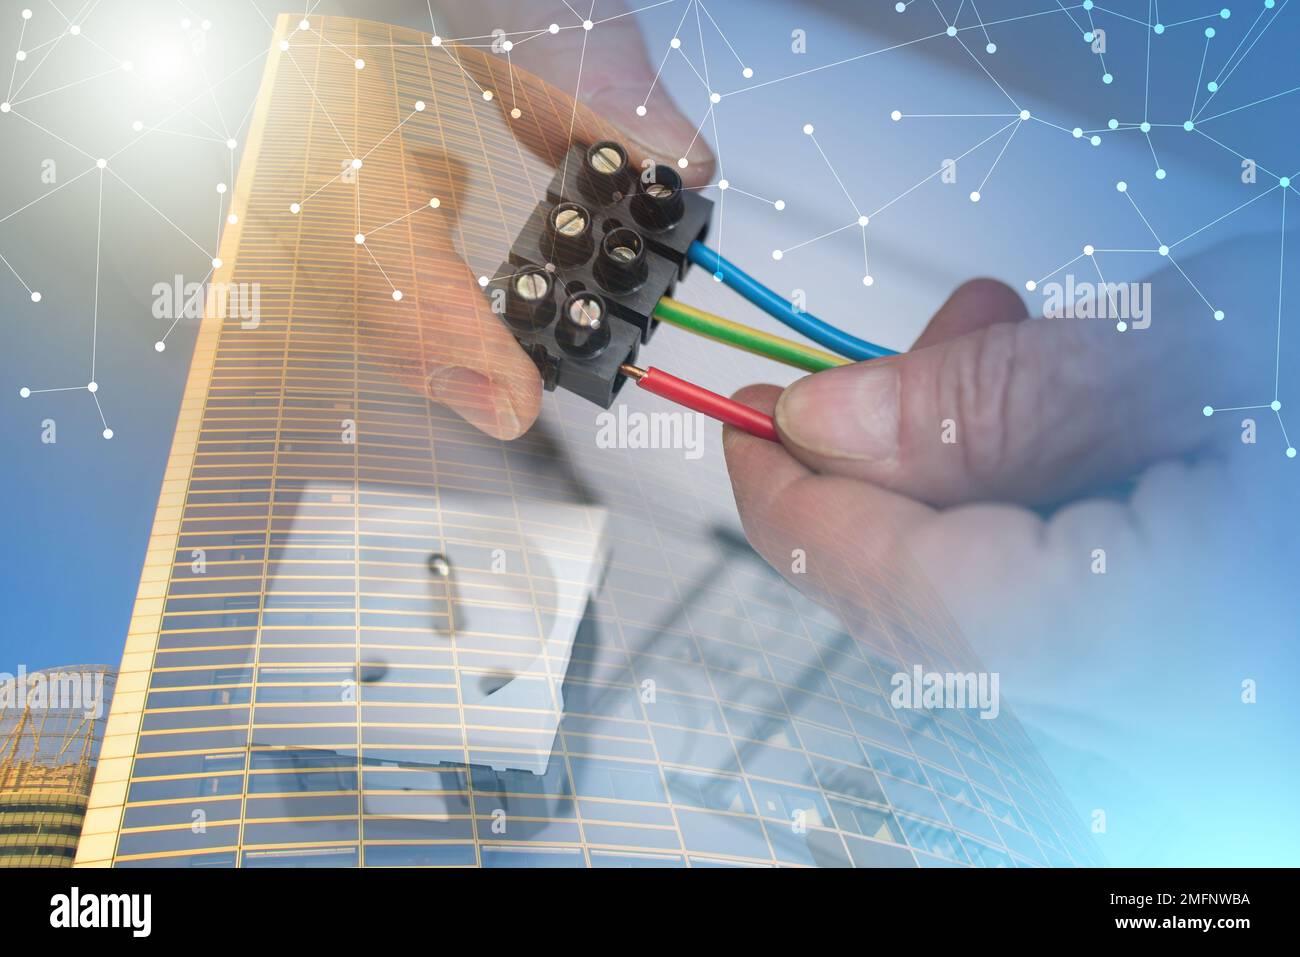 Electrician hands connecting wires in terminal block; multiple exposure Stock Photo